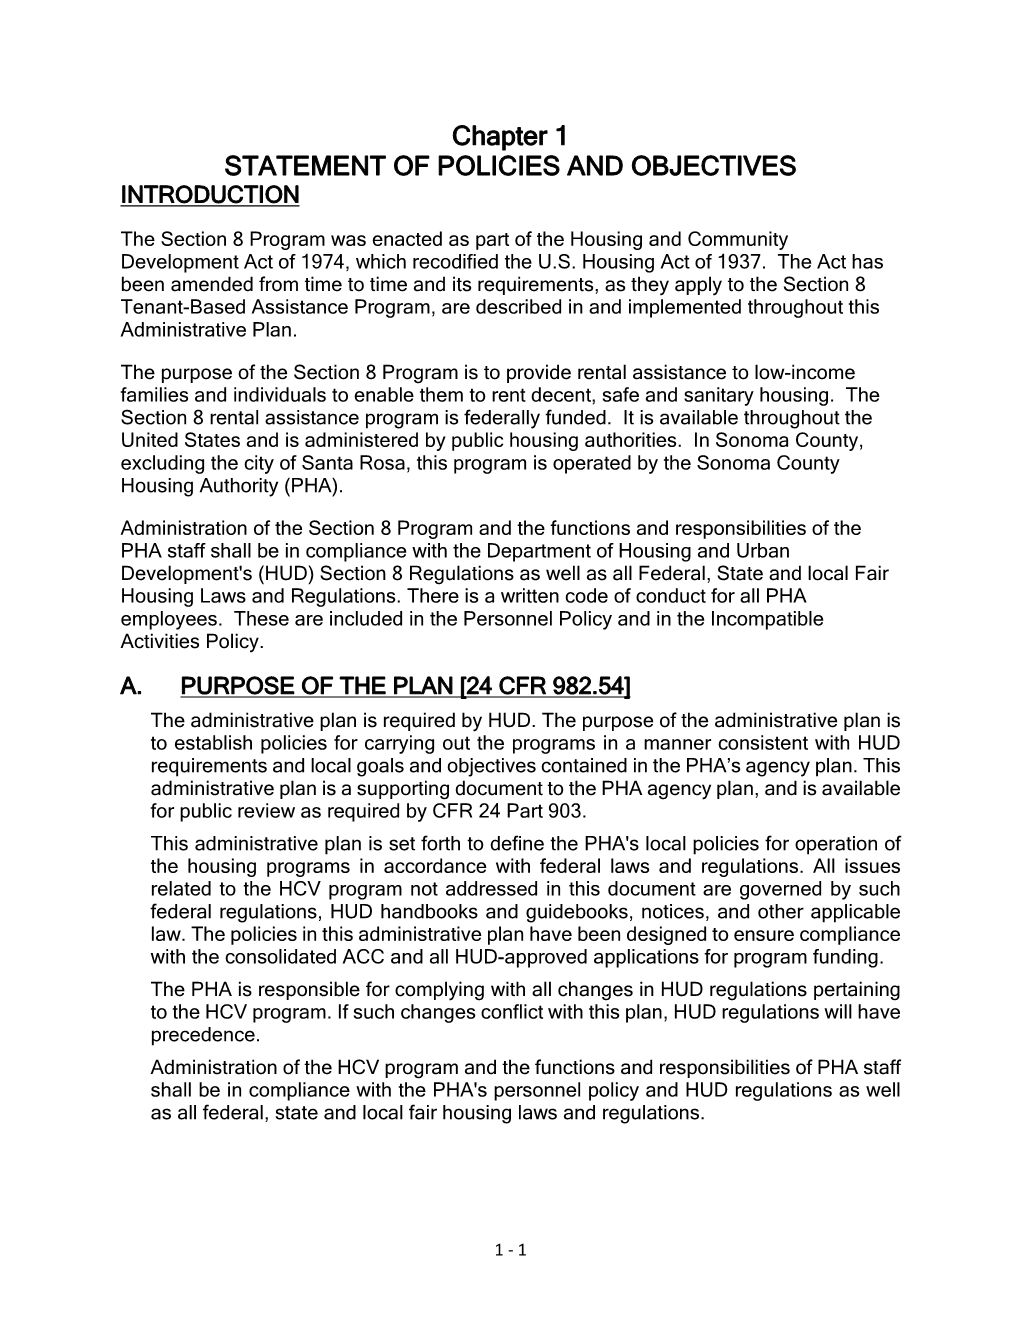 Chapter 1 STATEMENT of POLICIES and OBJECTIVES INTRODUCTION